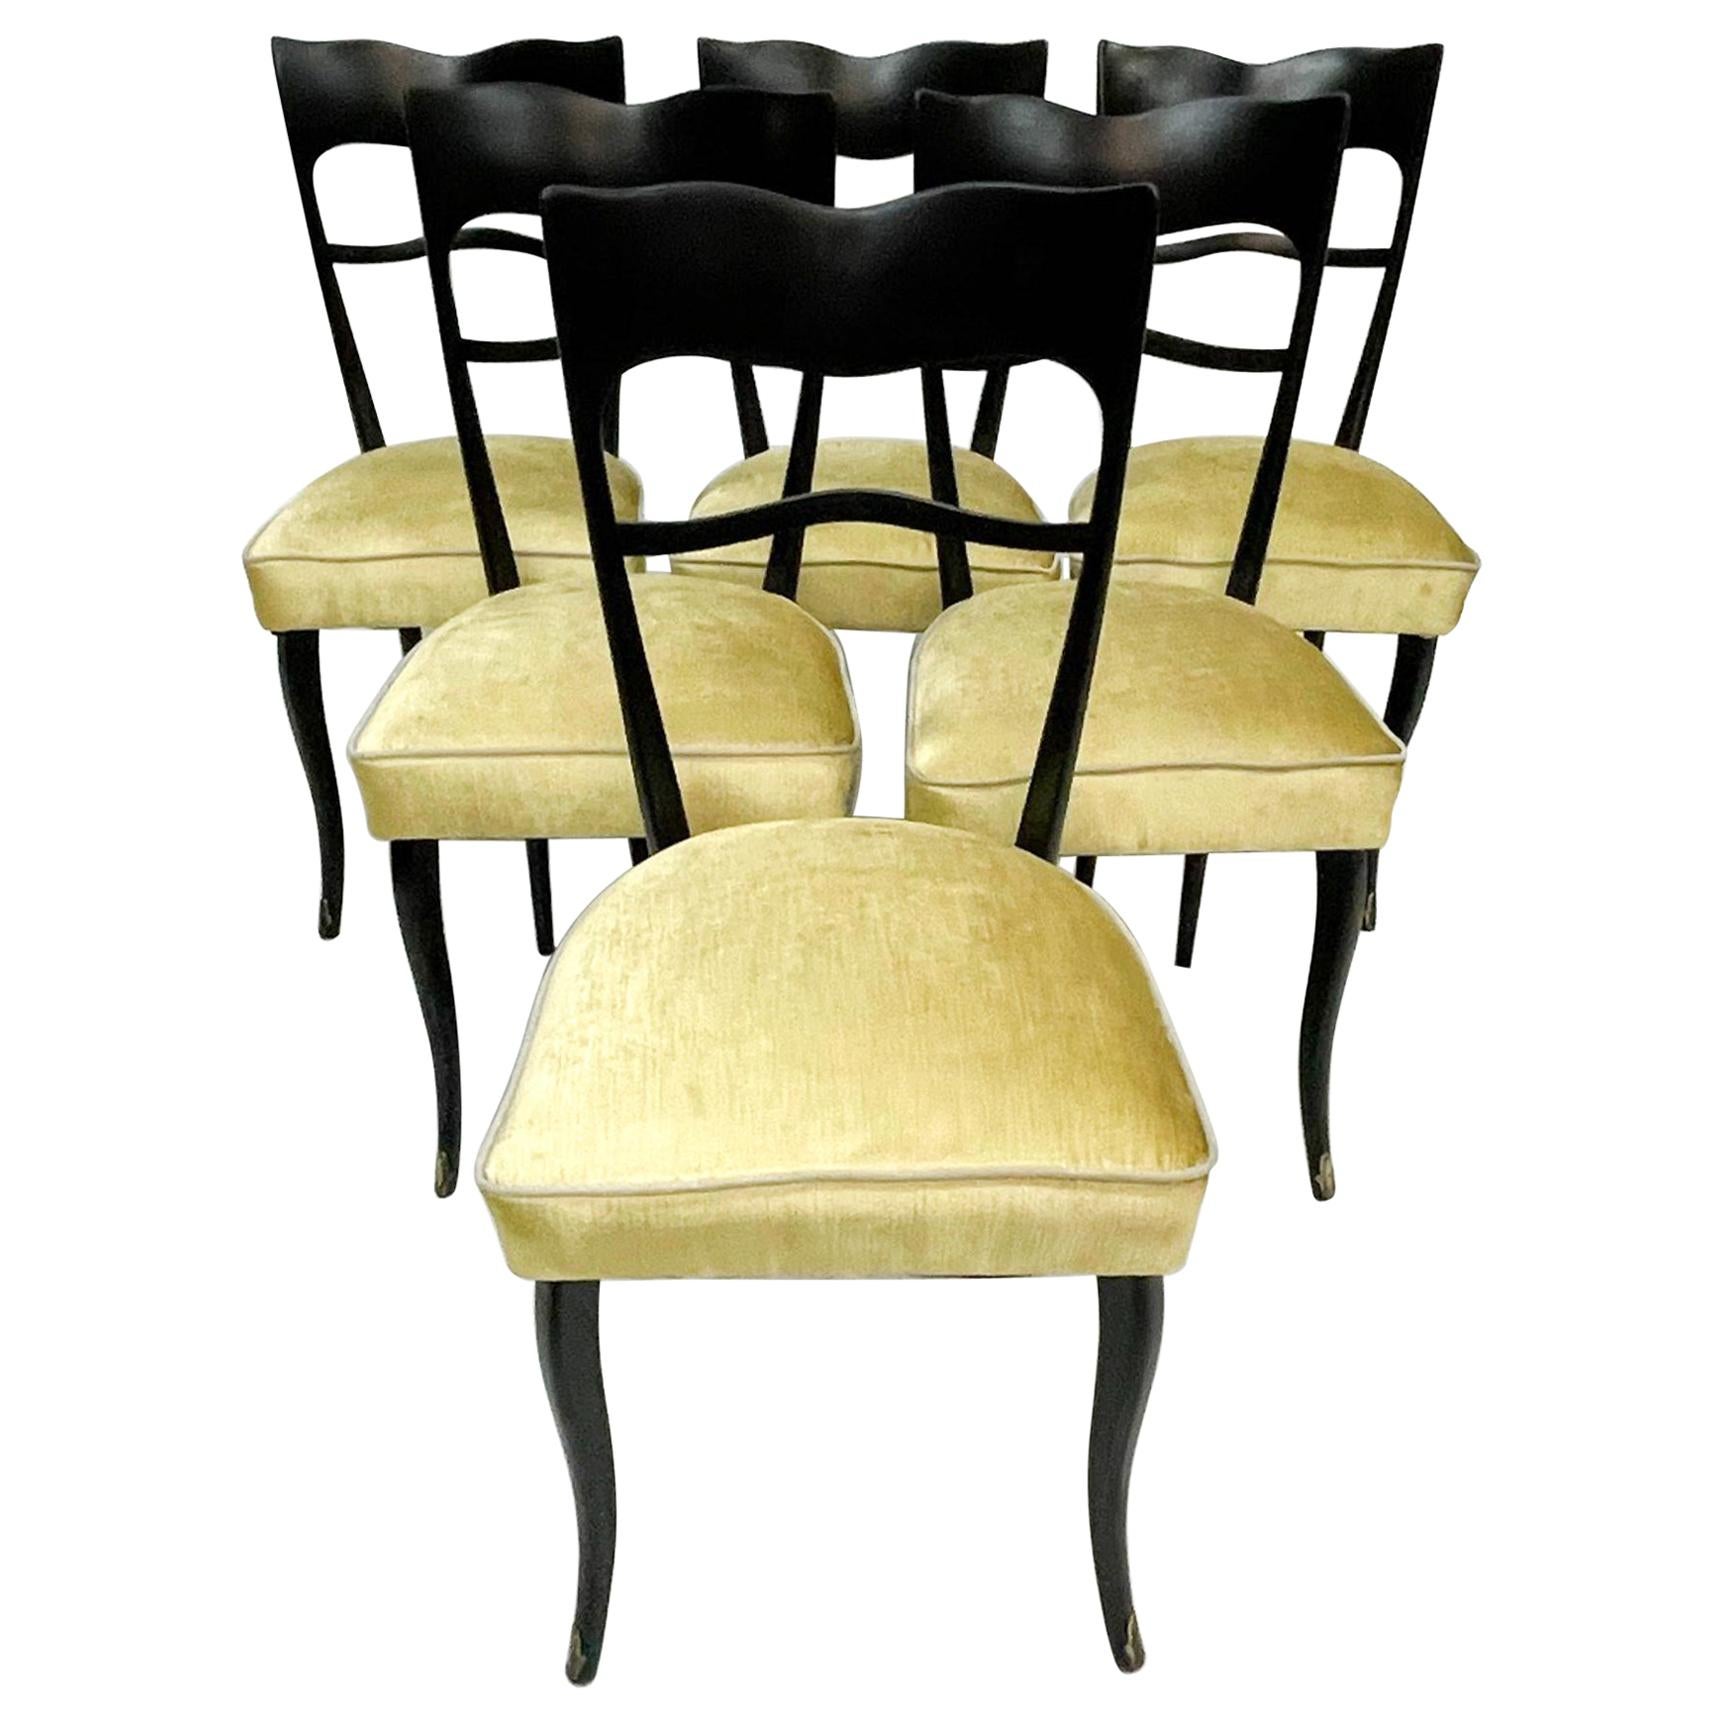 Set of Six Italian Dining Chairs, Design Attributed to Ico Parisi